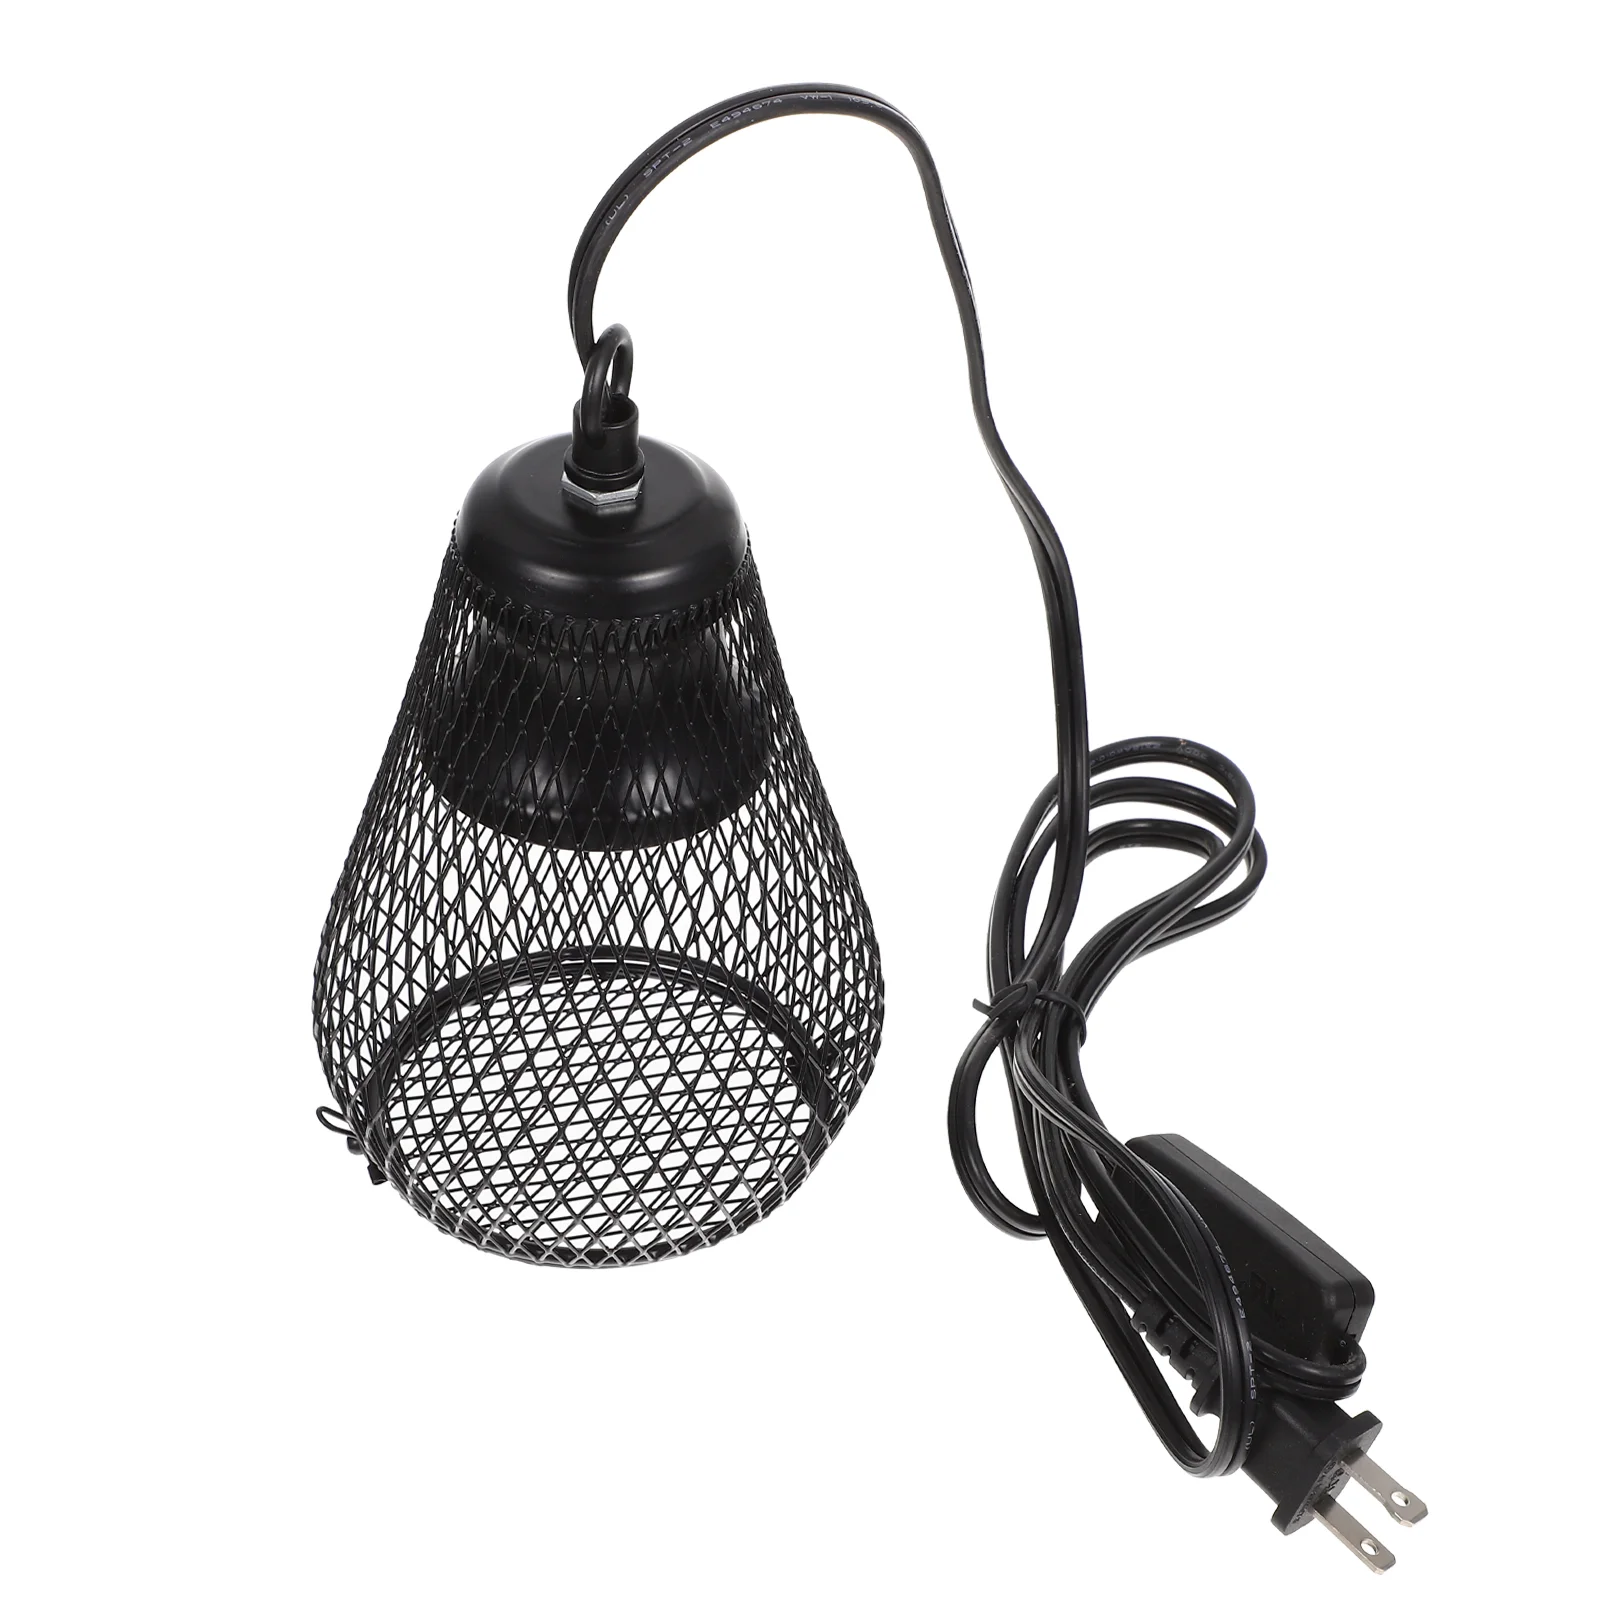 

Lamp Reptile Cover Light Mesh Basking Shade Lampshade Anti Domes Heating Dome Holder Scald Hook Lizard Reflection Fixture Snake